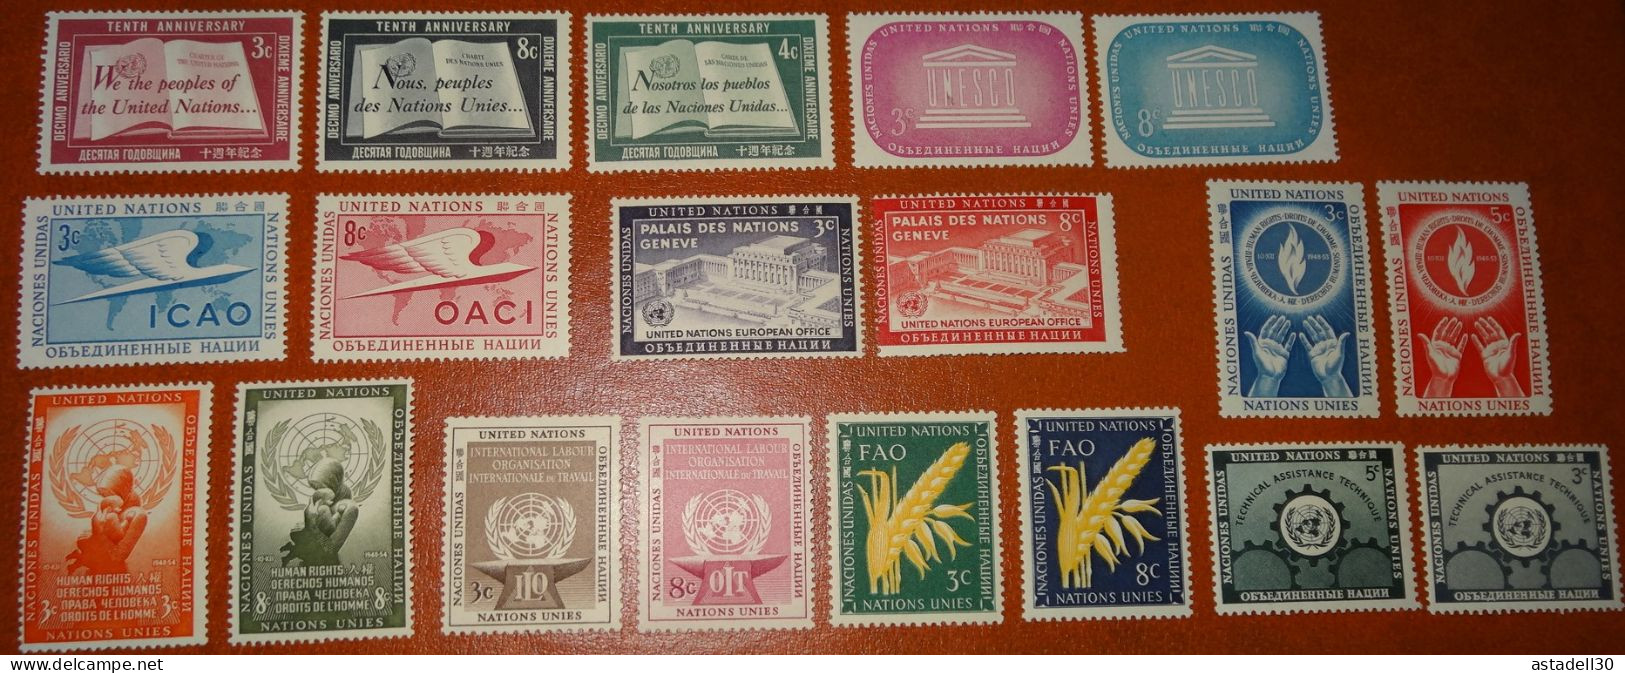 UNITED NATIONS, NATIONS UNIS : Lot De Timbres Neuf** Sans Charniere LUXE Des An 50 .......... CL1-11-1 - Ungebraucht